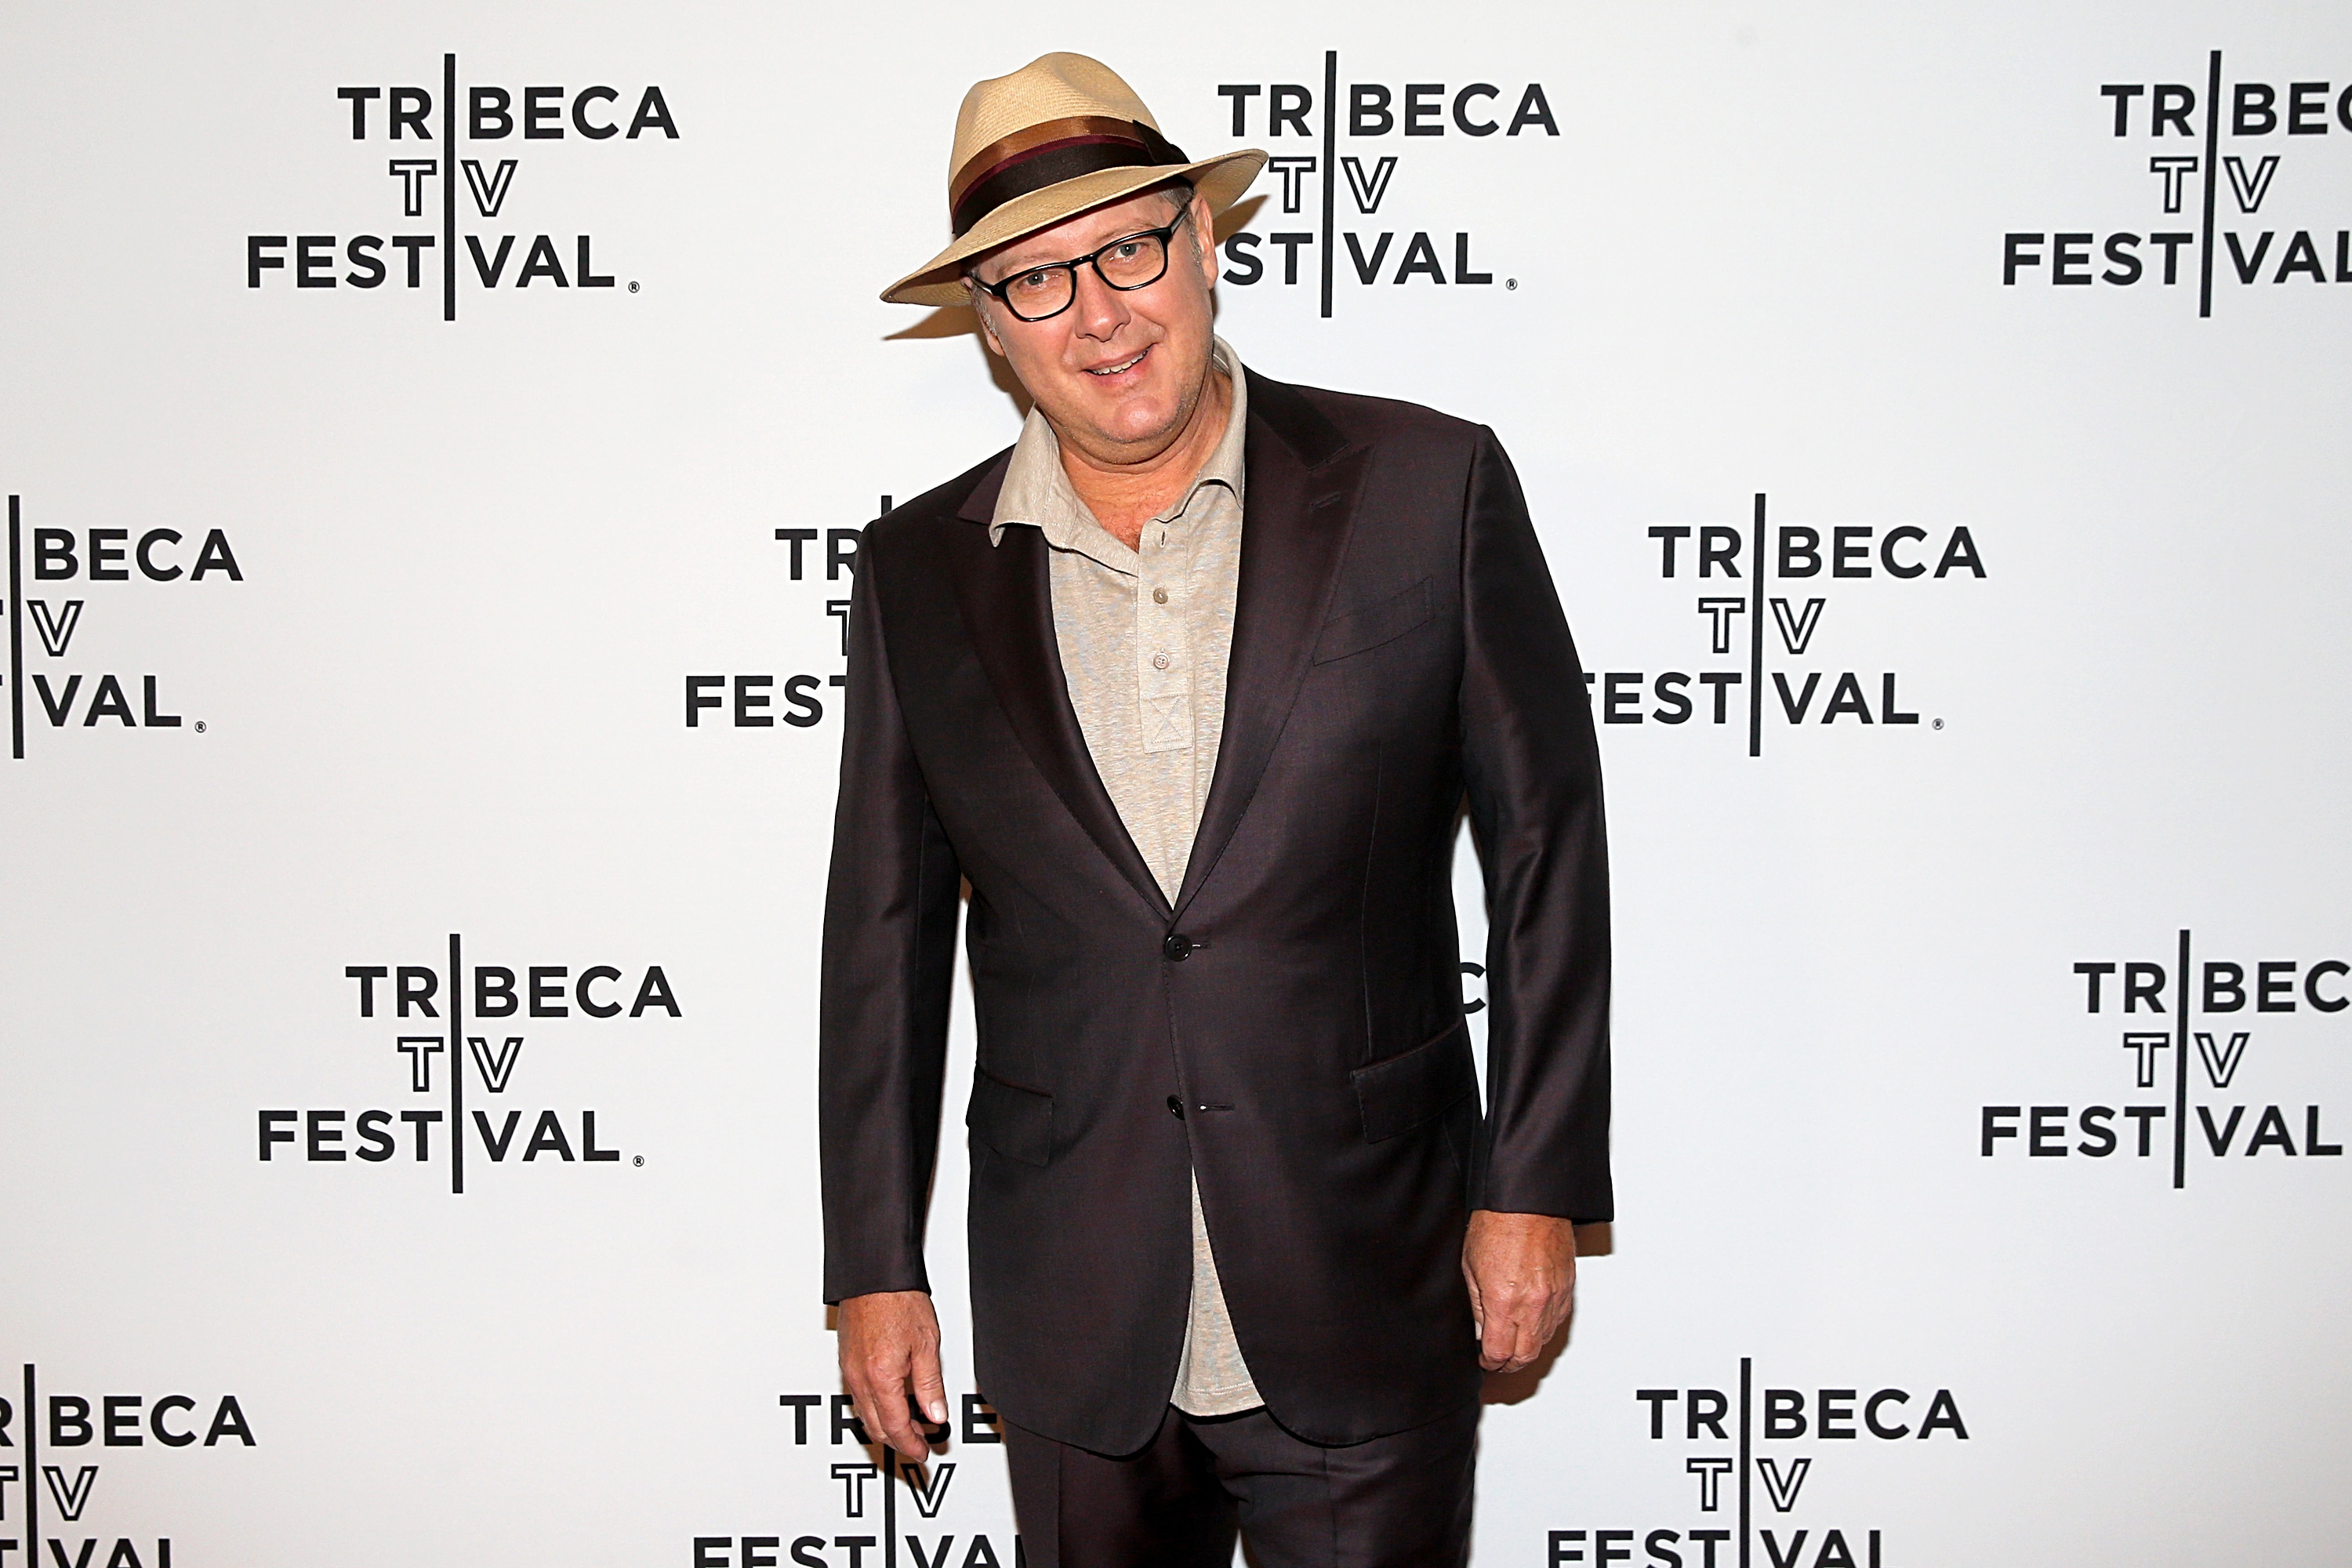 James Spader during the Tribeca Talks at the 2019 Tribeca TV Festival at Regal Battery Park Cinemas on September 12, 2019, in New York City. | Source: Getty Images